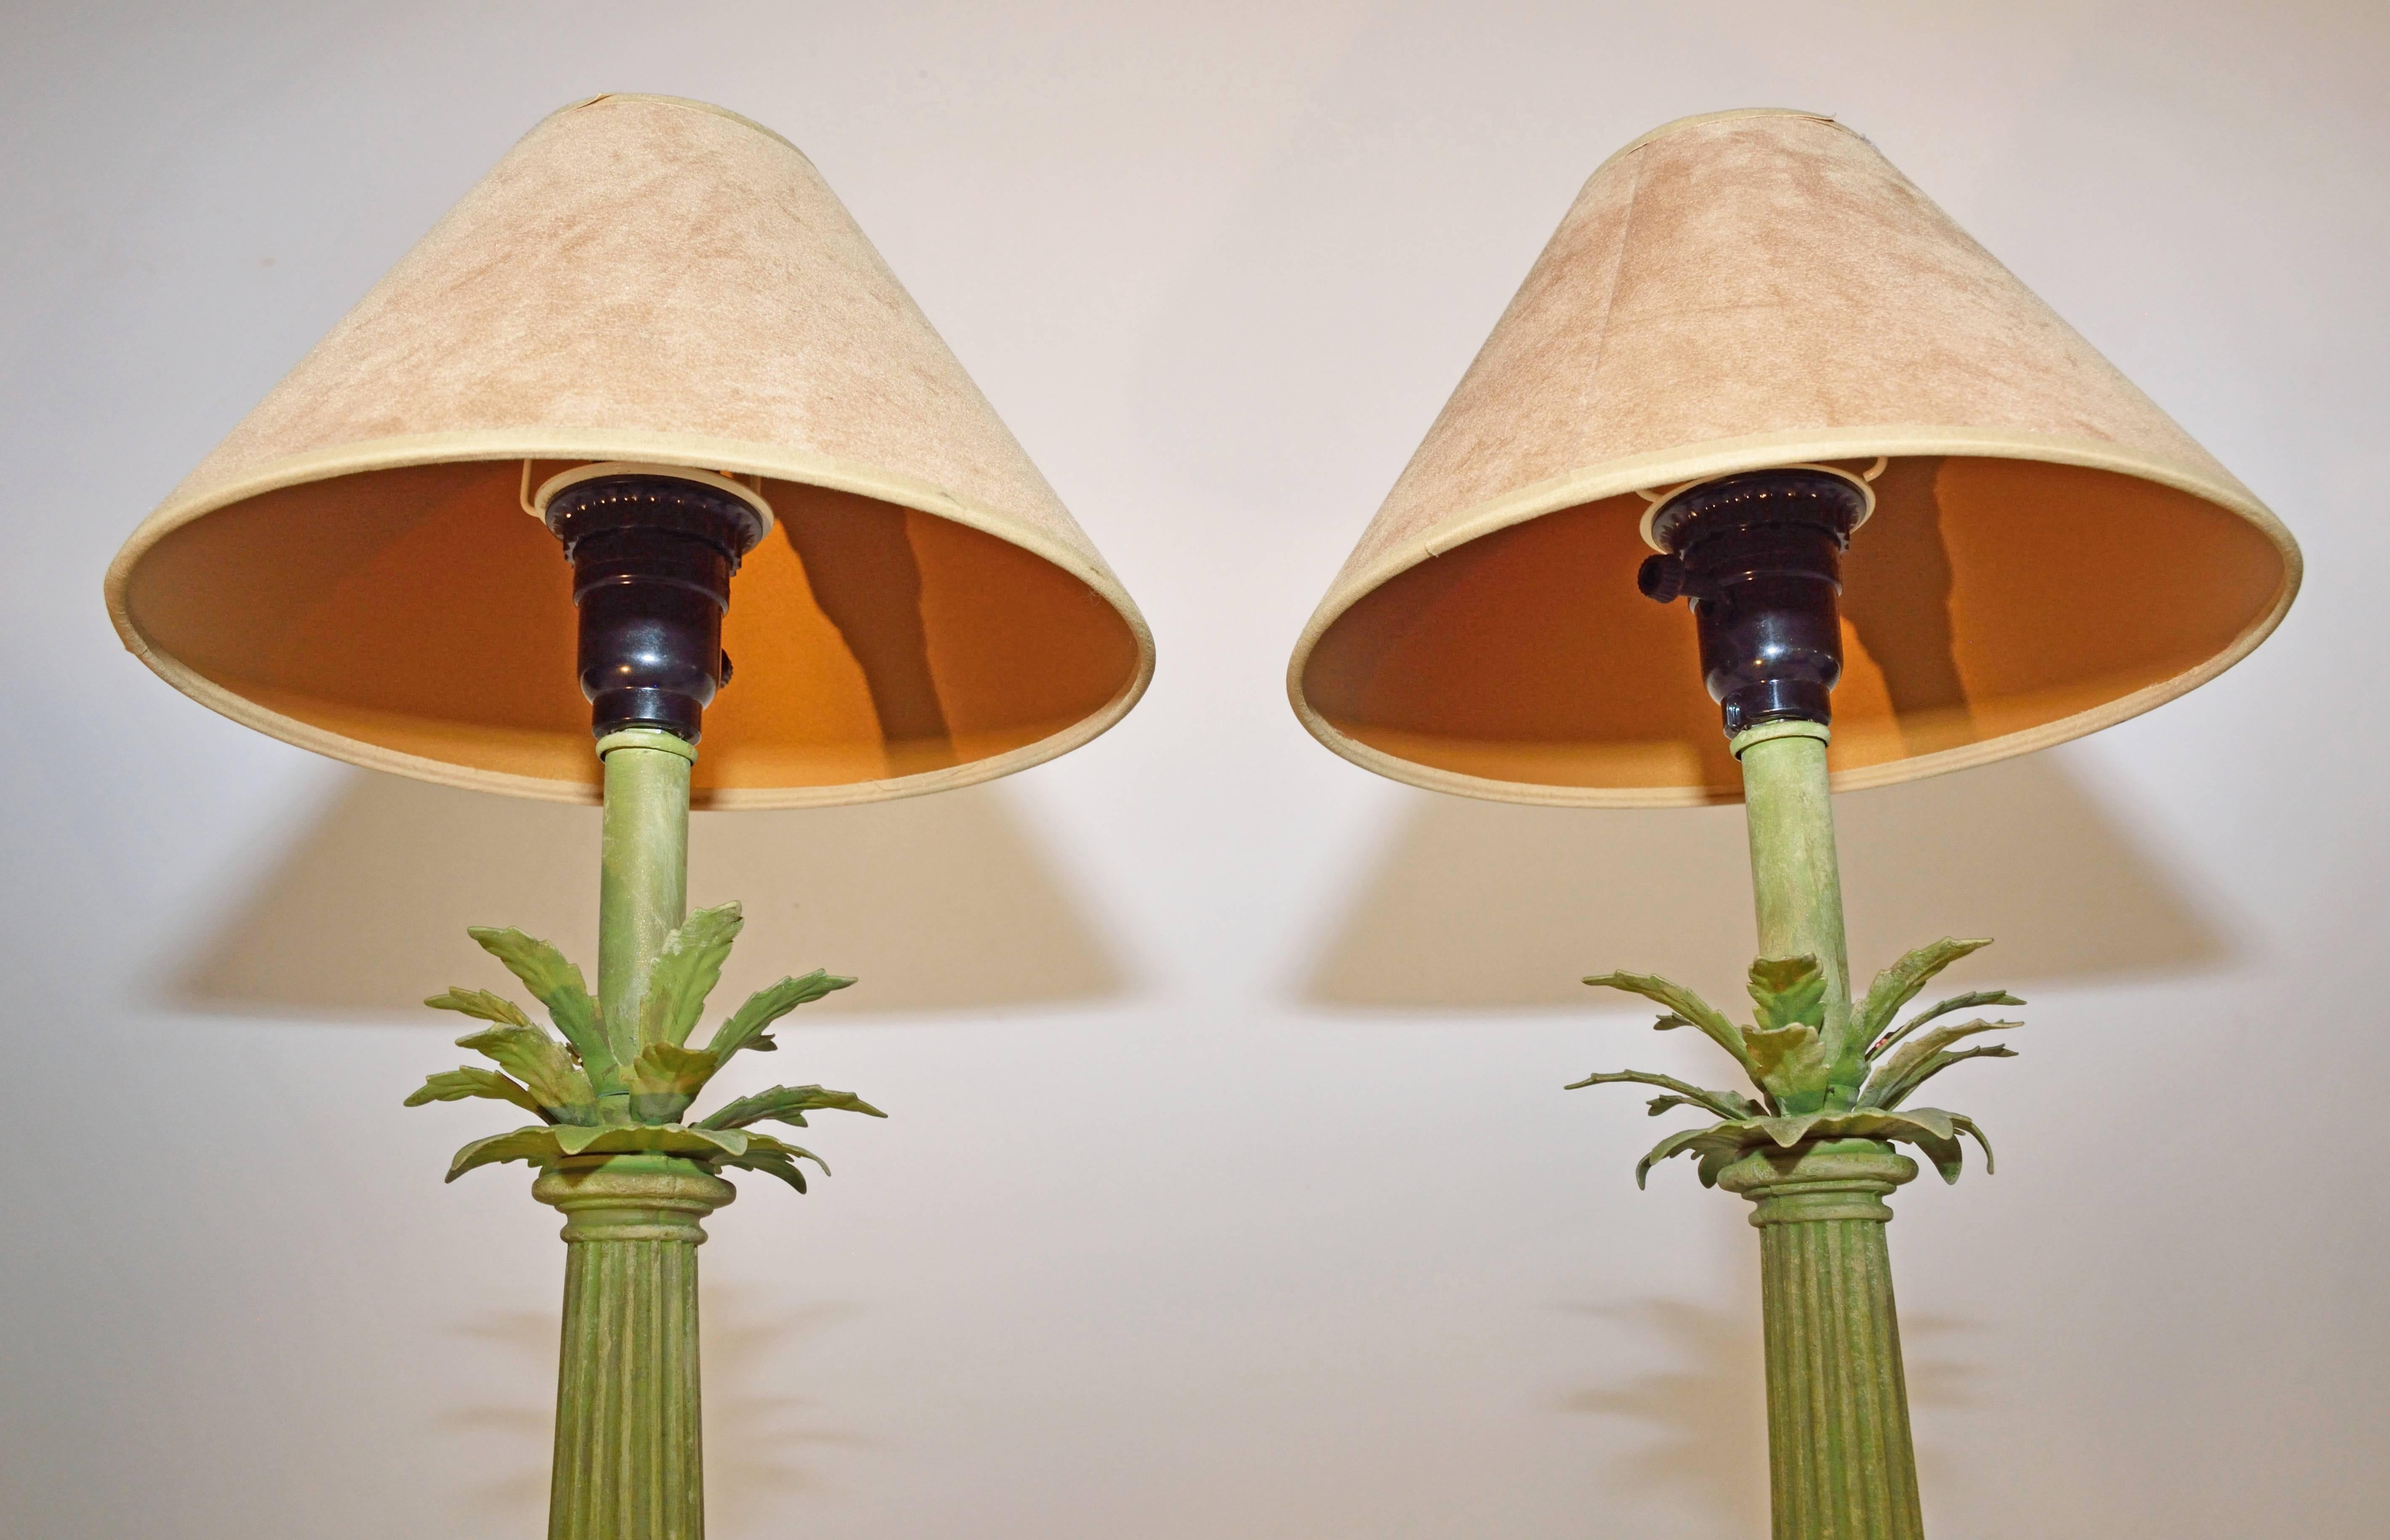 Pair of vintage lamps composed of tapered fluted columns set on bases and sprouting metal palm leaves at the top, all painted a mottled tropical green. The single lights are electrified for US use and have socket switches.

The suede-like tan